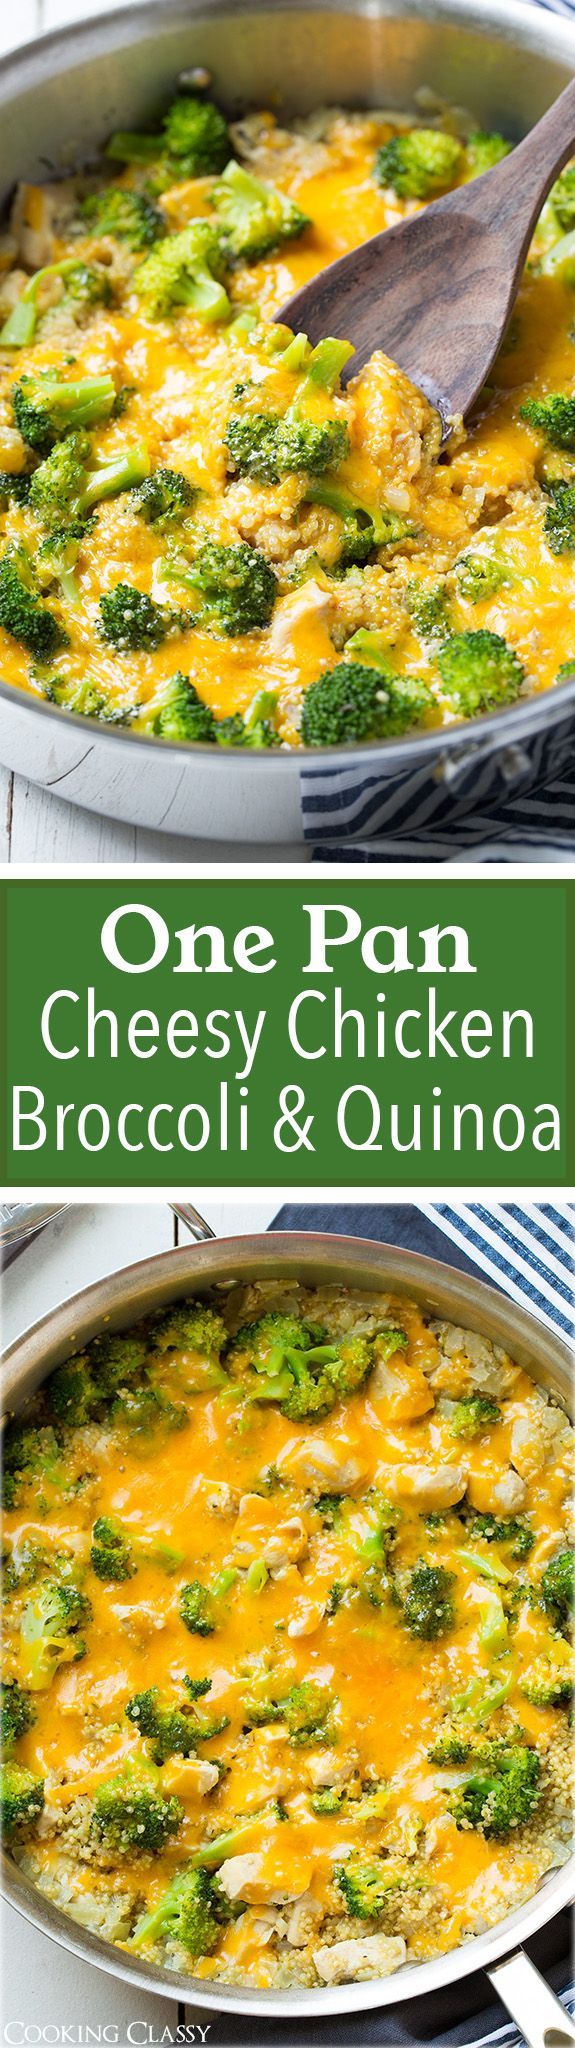 One Pan Cheesy Chicken Broccoli and Quinoa – Ive already made this 3 times now! Easy, healthy and delicious!